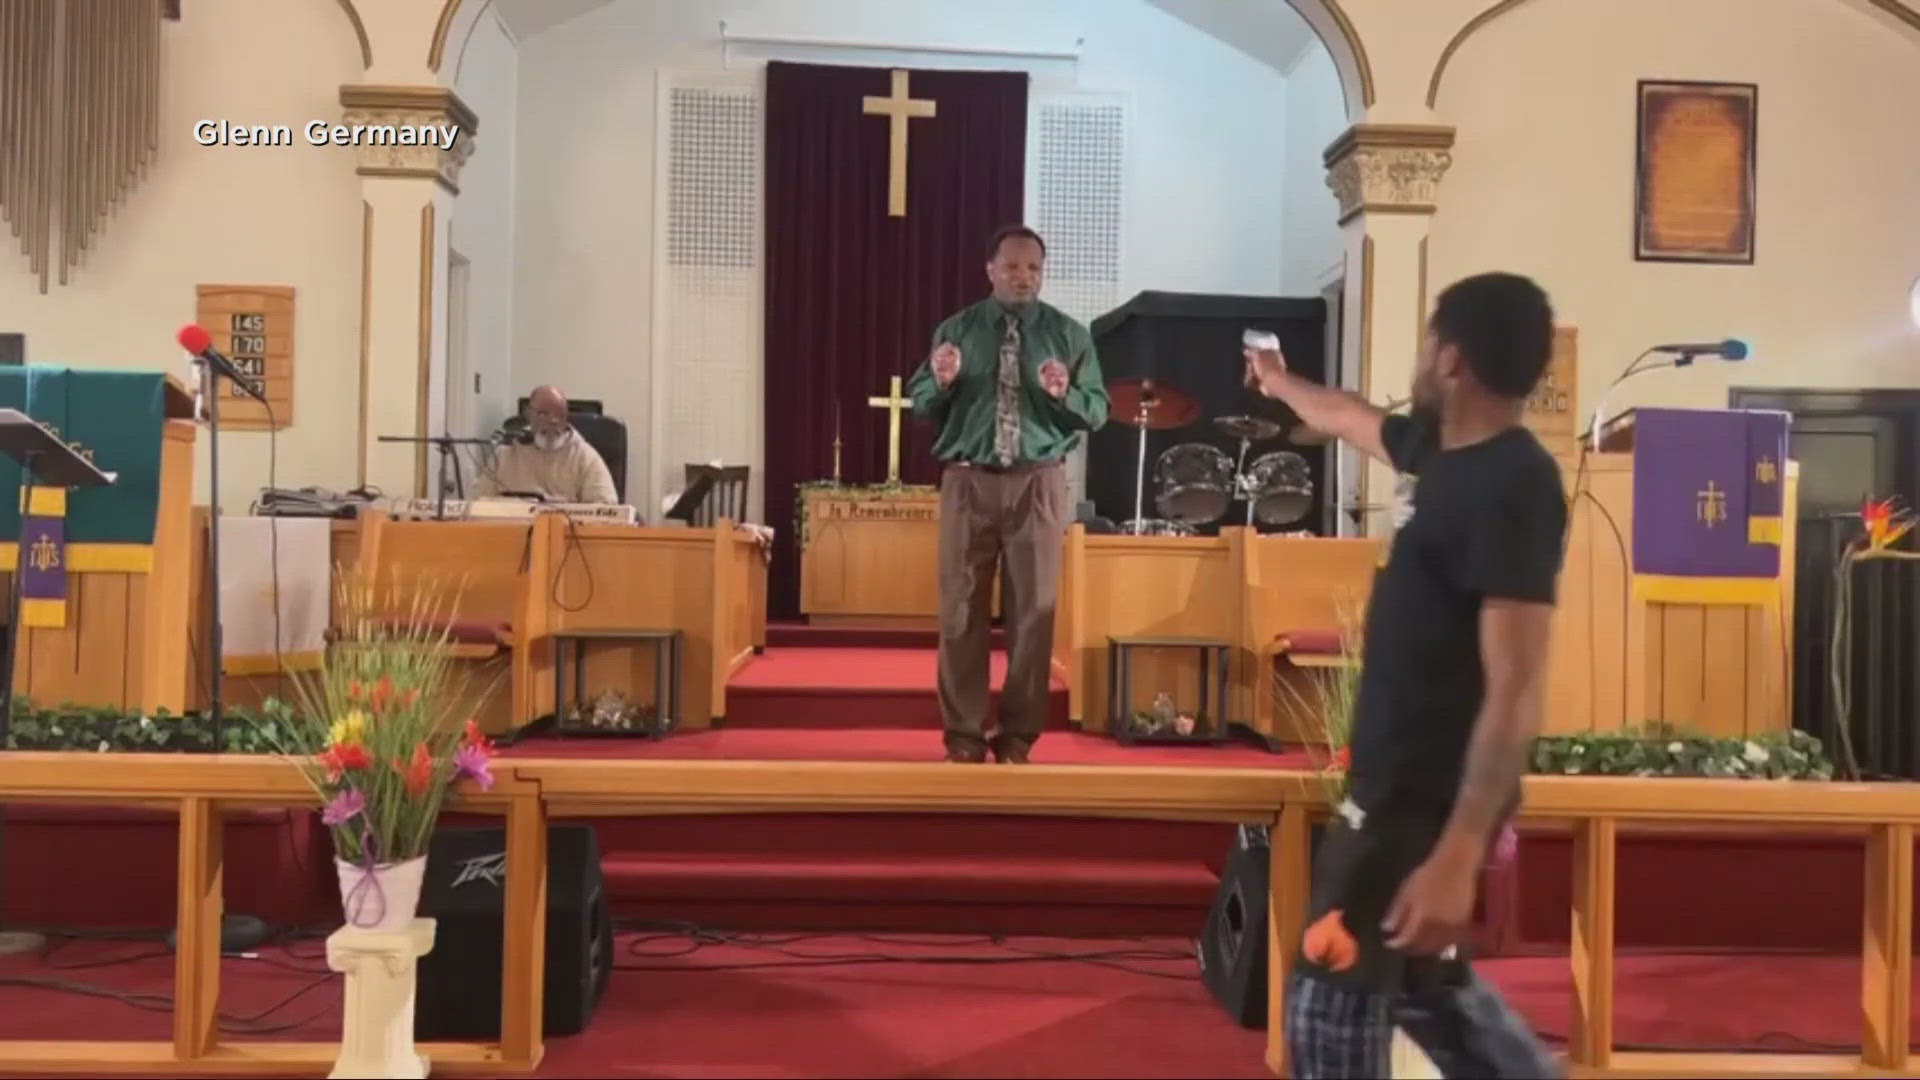 It was caught on the church's livestream.